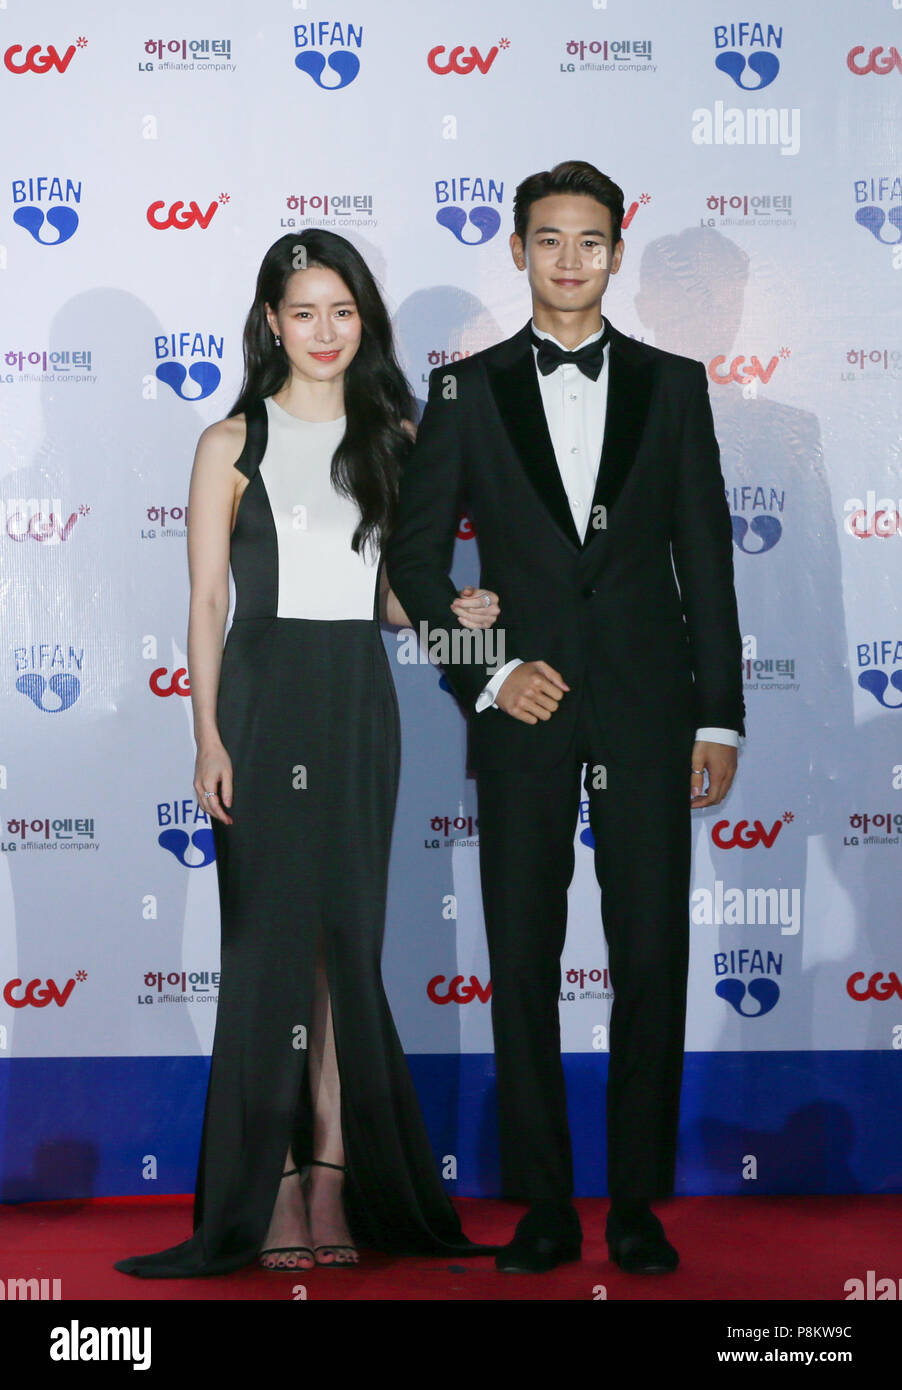 Bucheon, South Korea. 12th July, 2018. South Korean singer Choi Min-ho (R) and actress Lim Ji-yeon appear at the 22nd Bucheon International Fantastic Film Festival red carpet in Bucheon, South Korea, July 12, 2018. The 10-day 22nd Bucheon International Fantastic Film Festival, with its theme as 'Love, Fantasy and Adventure', kicked off here Thursday. Credit: Wang Jingqiang/Xinhua/Alamy Live News Stock Photo